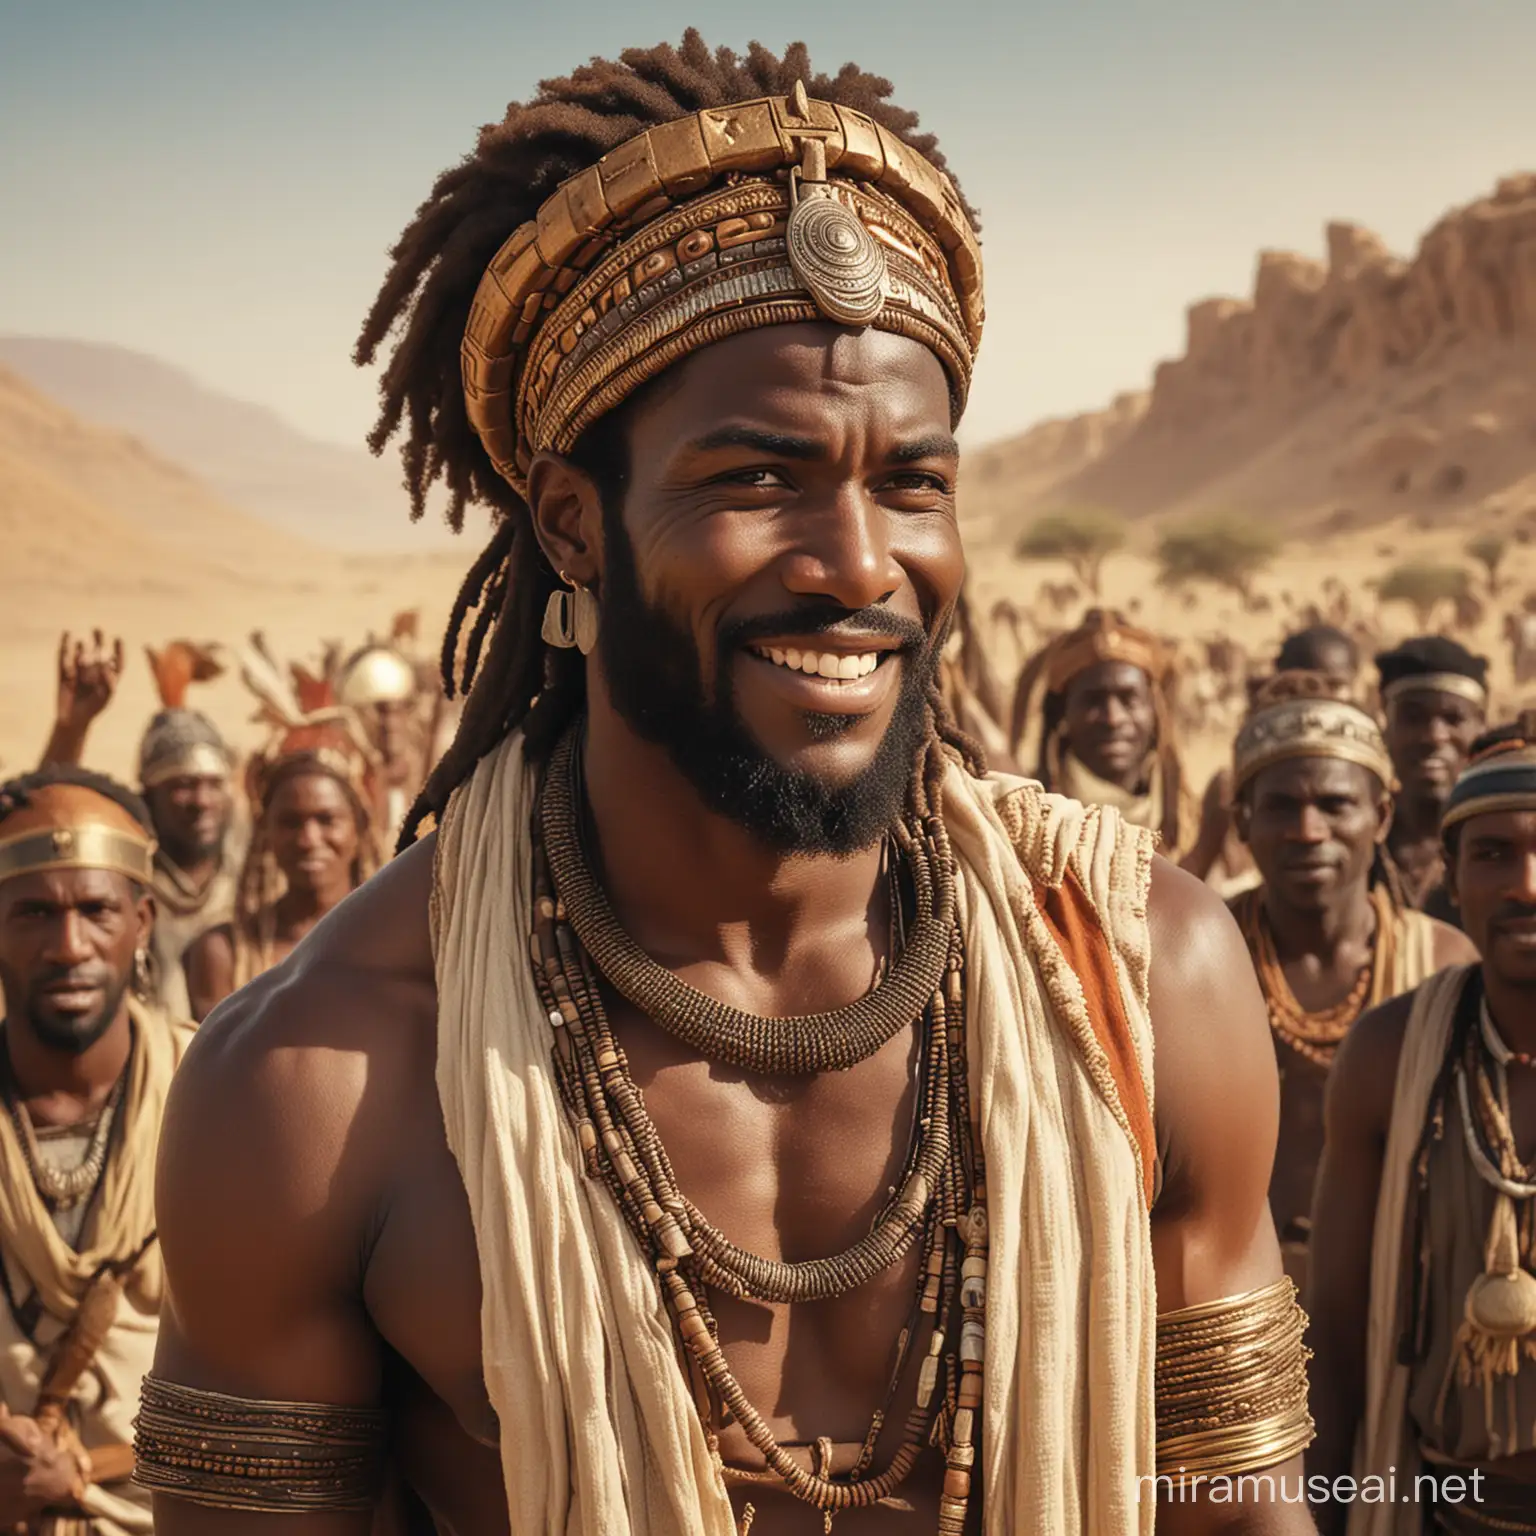 The elders call (((JEPHTHAH))), a charming muscular African Israelite man, with a radiant smile and some elders of his tribe  to a discussion to become their king 
. Surrounded by a setting in the land of Caanan 1000bc , th